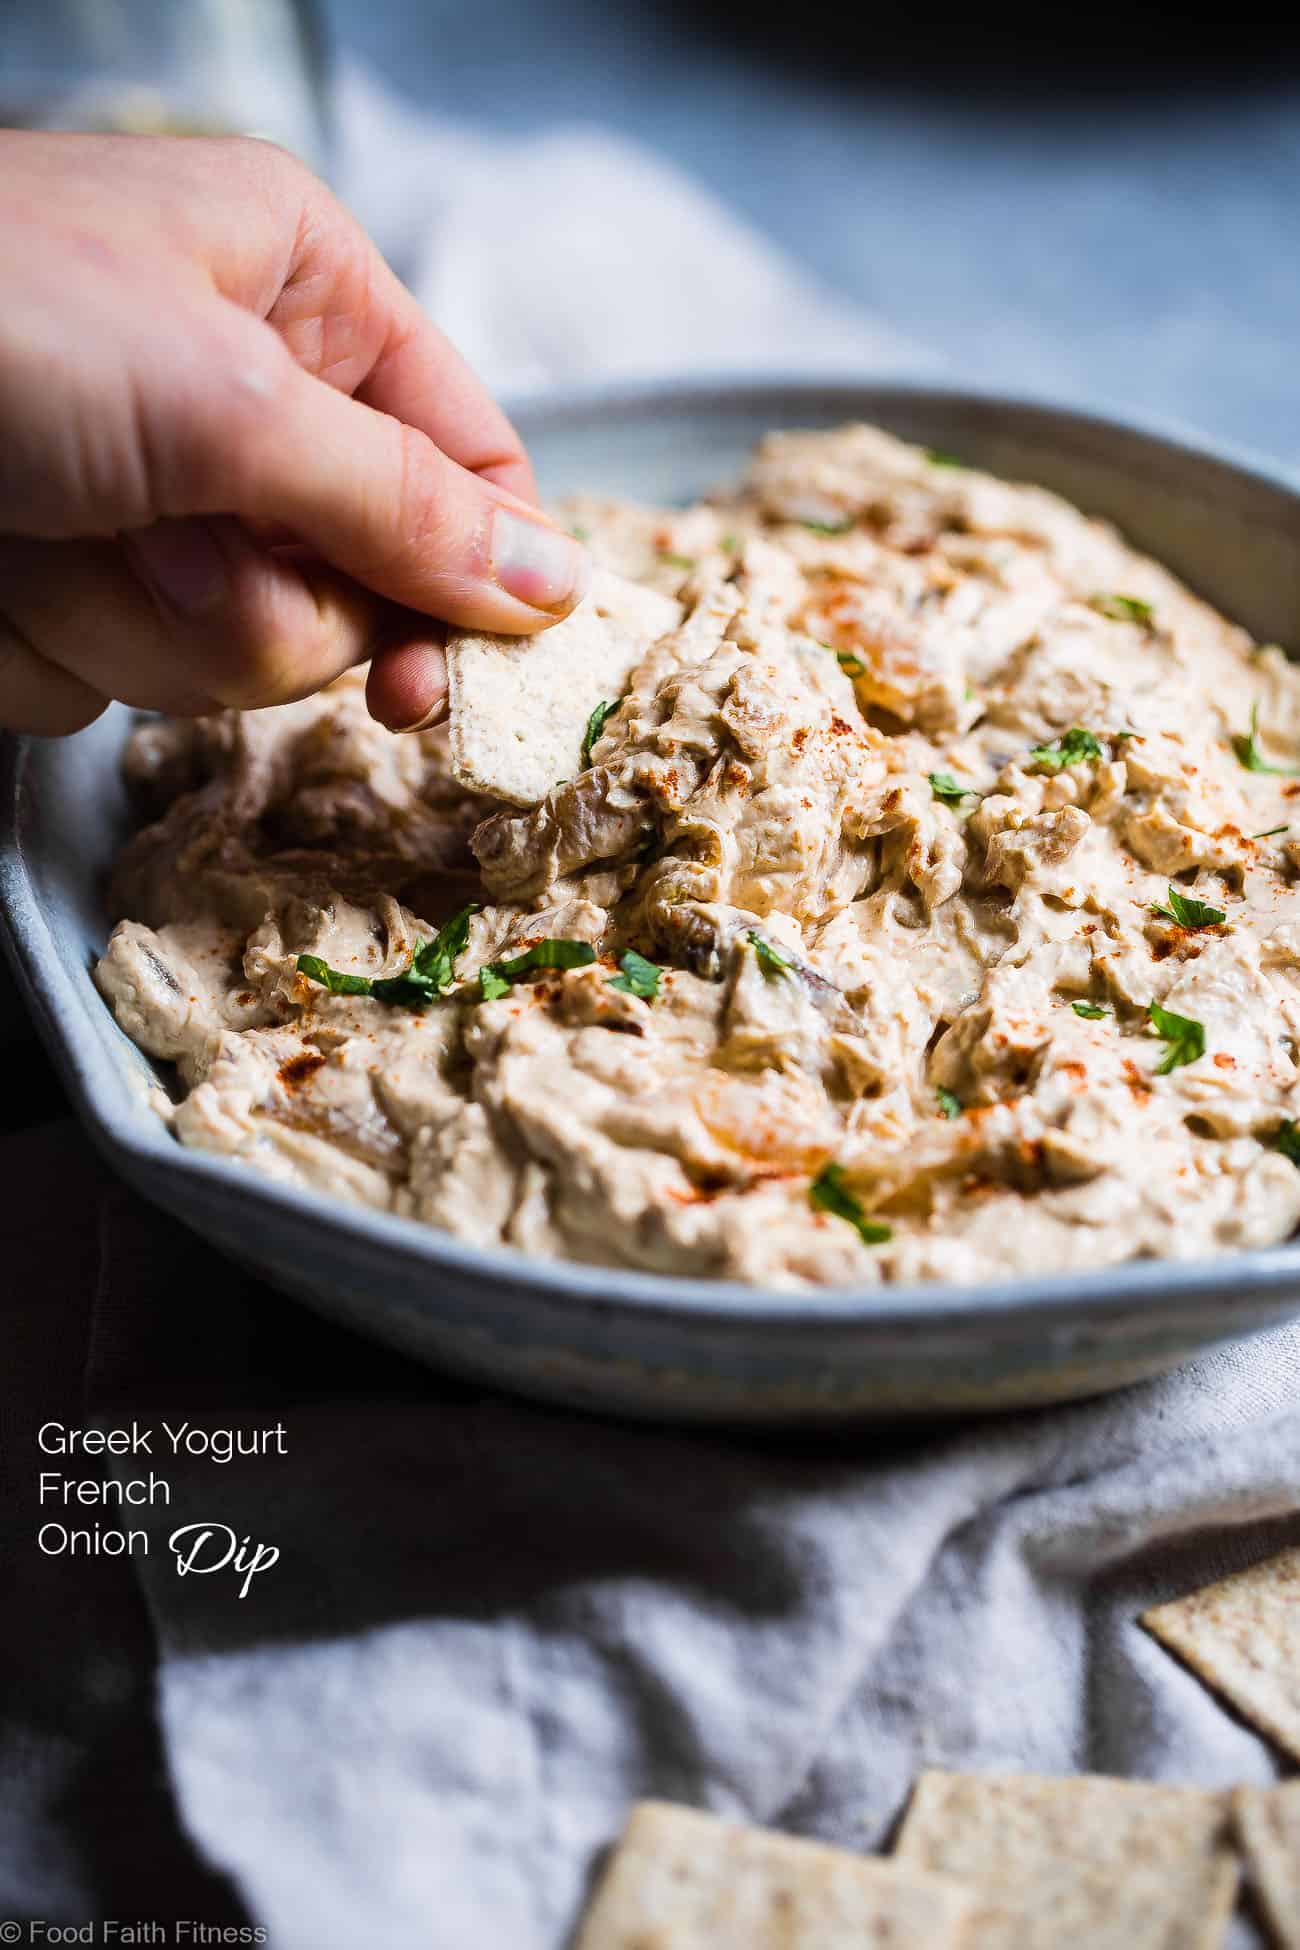 Easy Greek Yogurt French Onion Dip -Â This quick and easy French onion dip is a healthy, low carb, gluten free and protein packed appetizer that is perfect for parties! Only 110 calories and so creamy! | Foodfaithfitness.com | @FoodFaithFit